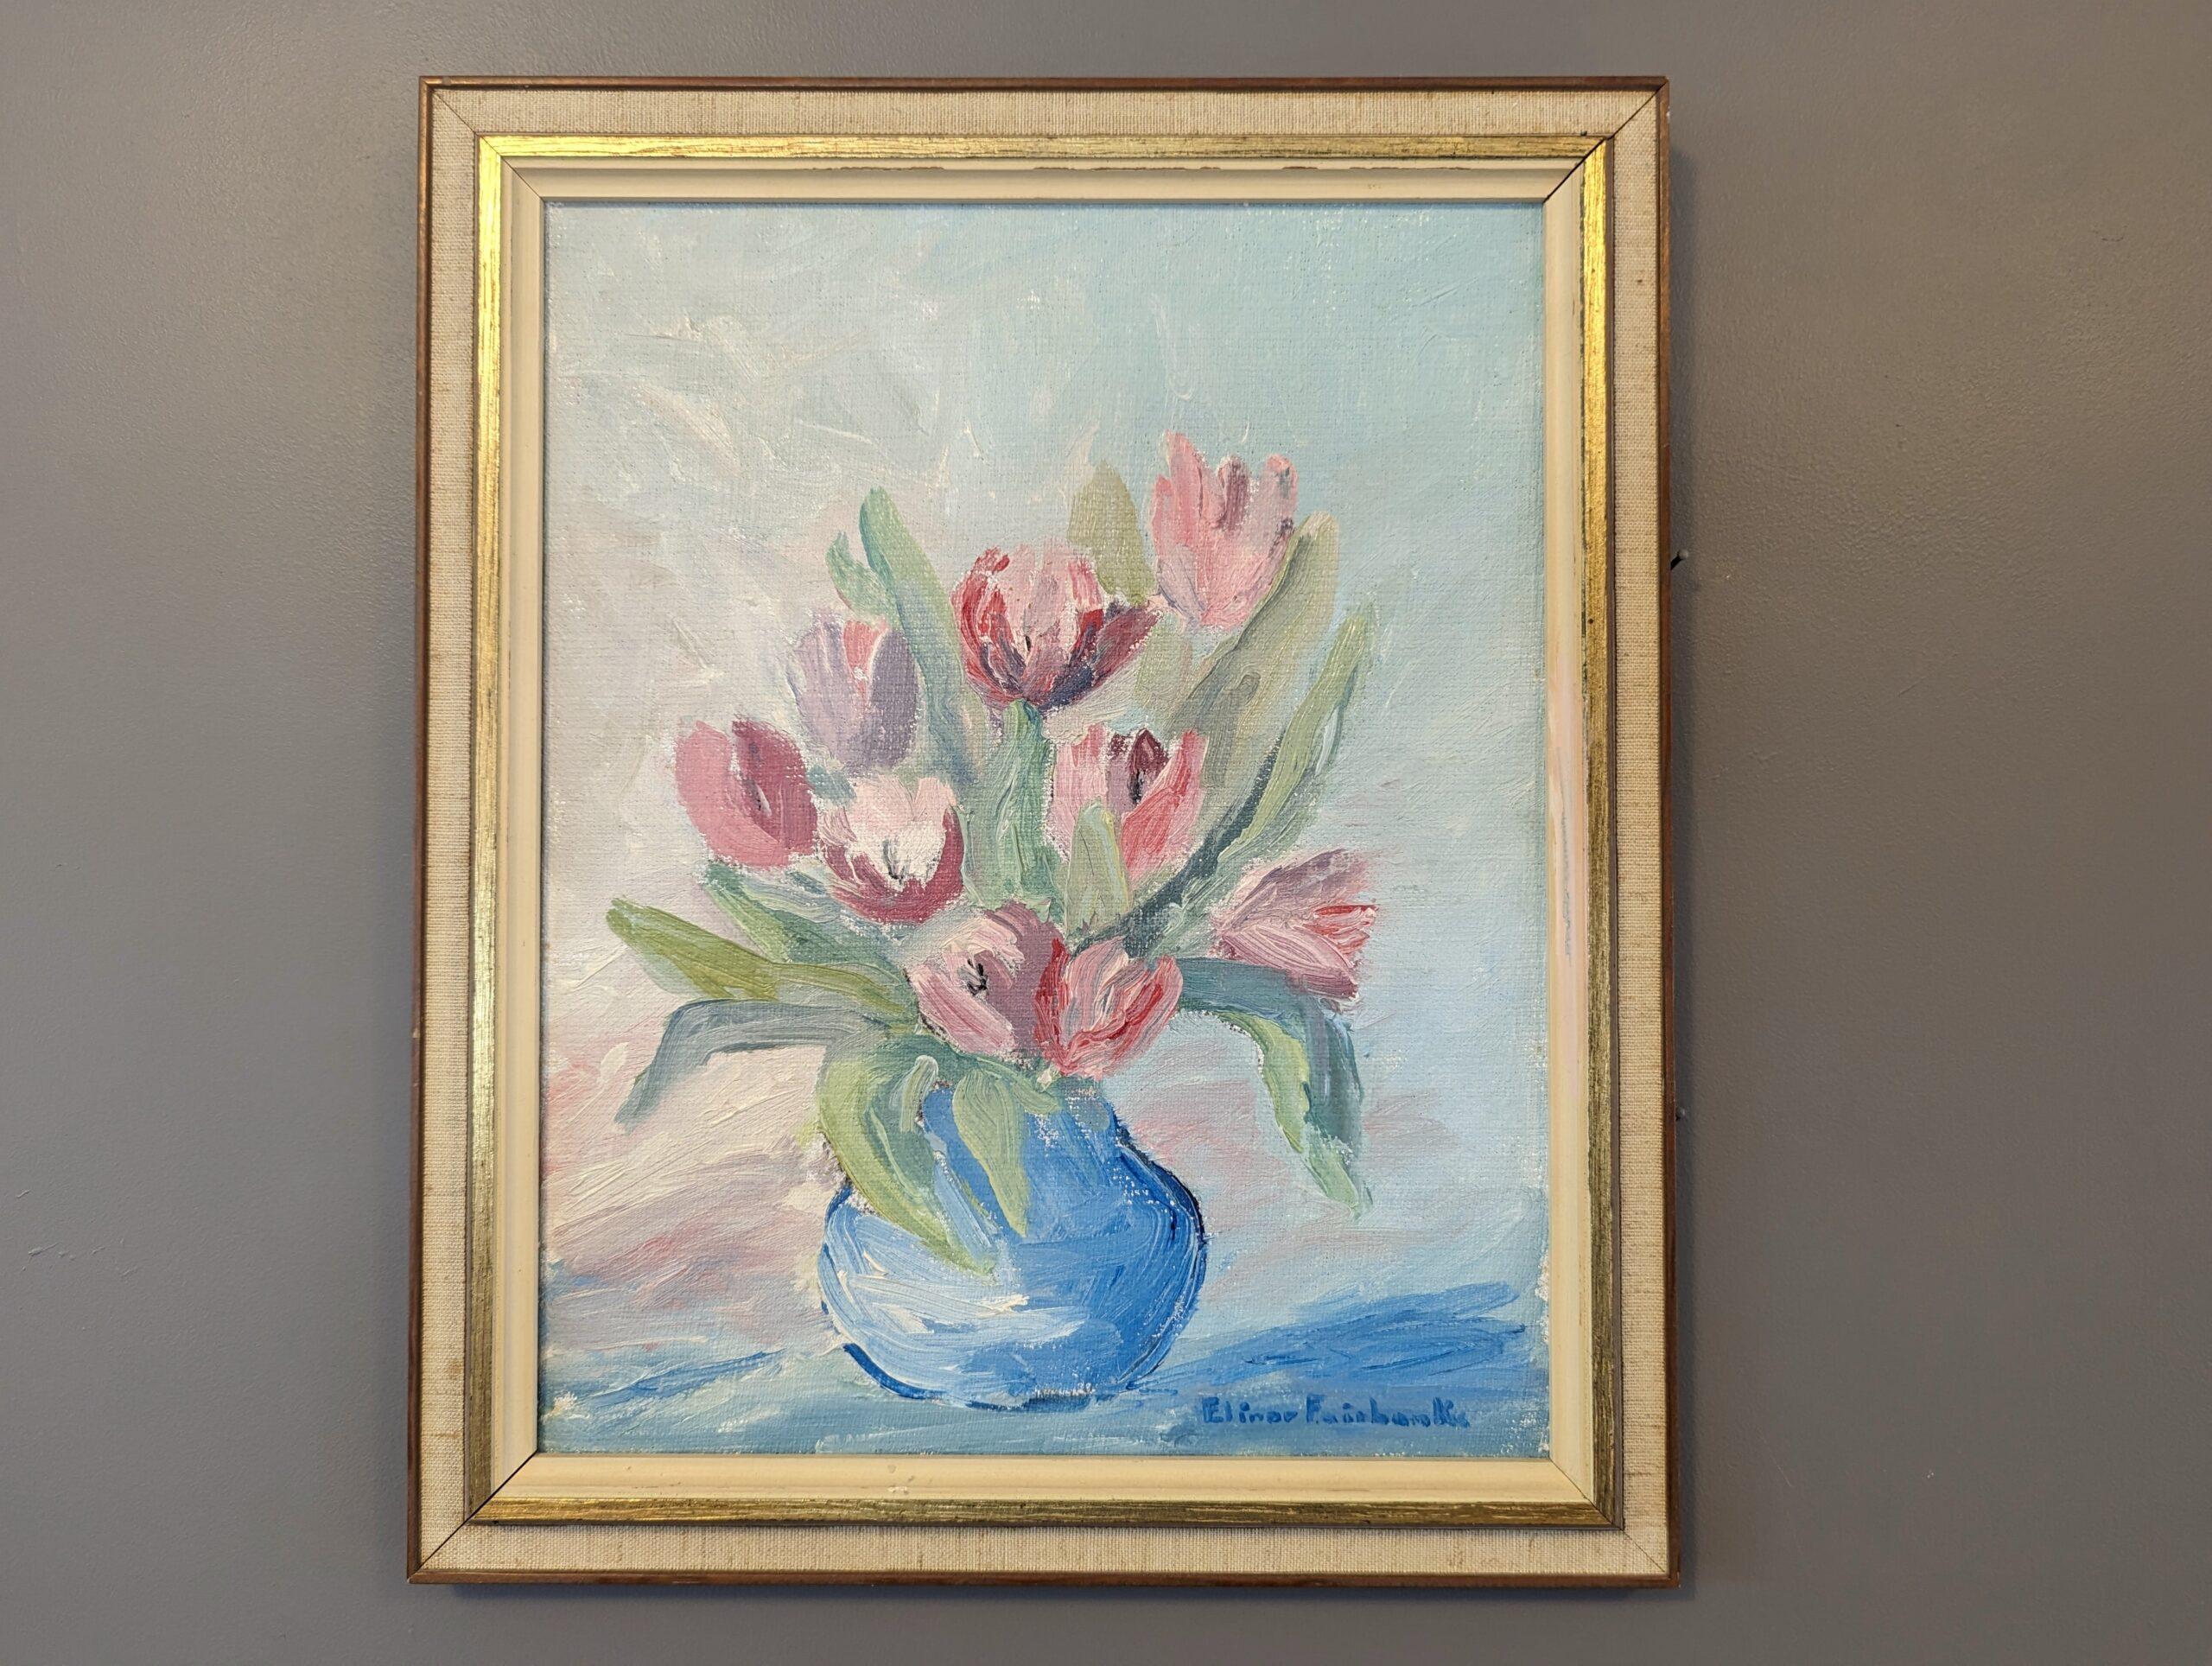 TULIPS IN PASTEL
Size: 38 x 32 cm (including frame)
Oil on canvas

A very elegant mid-century modernist floral oil composition, painted onto canvas.

In this floral piece we have light pink tulips in a blue vase, painted in an expressionist style.